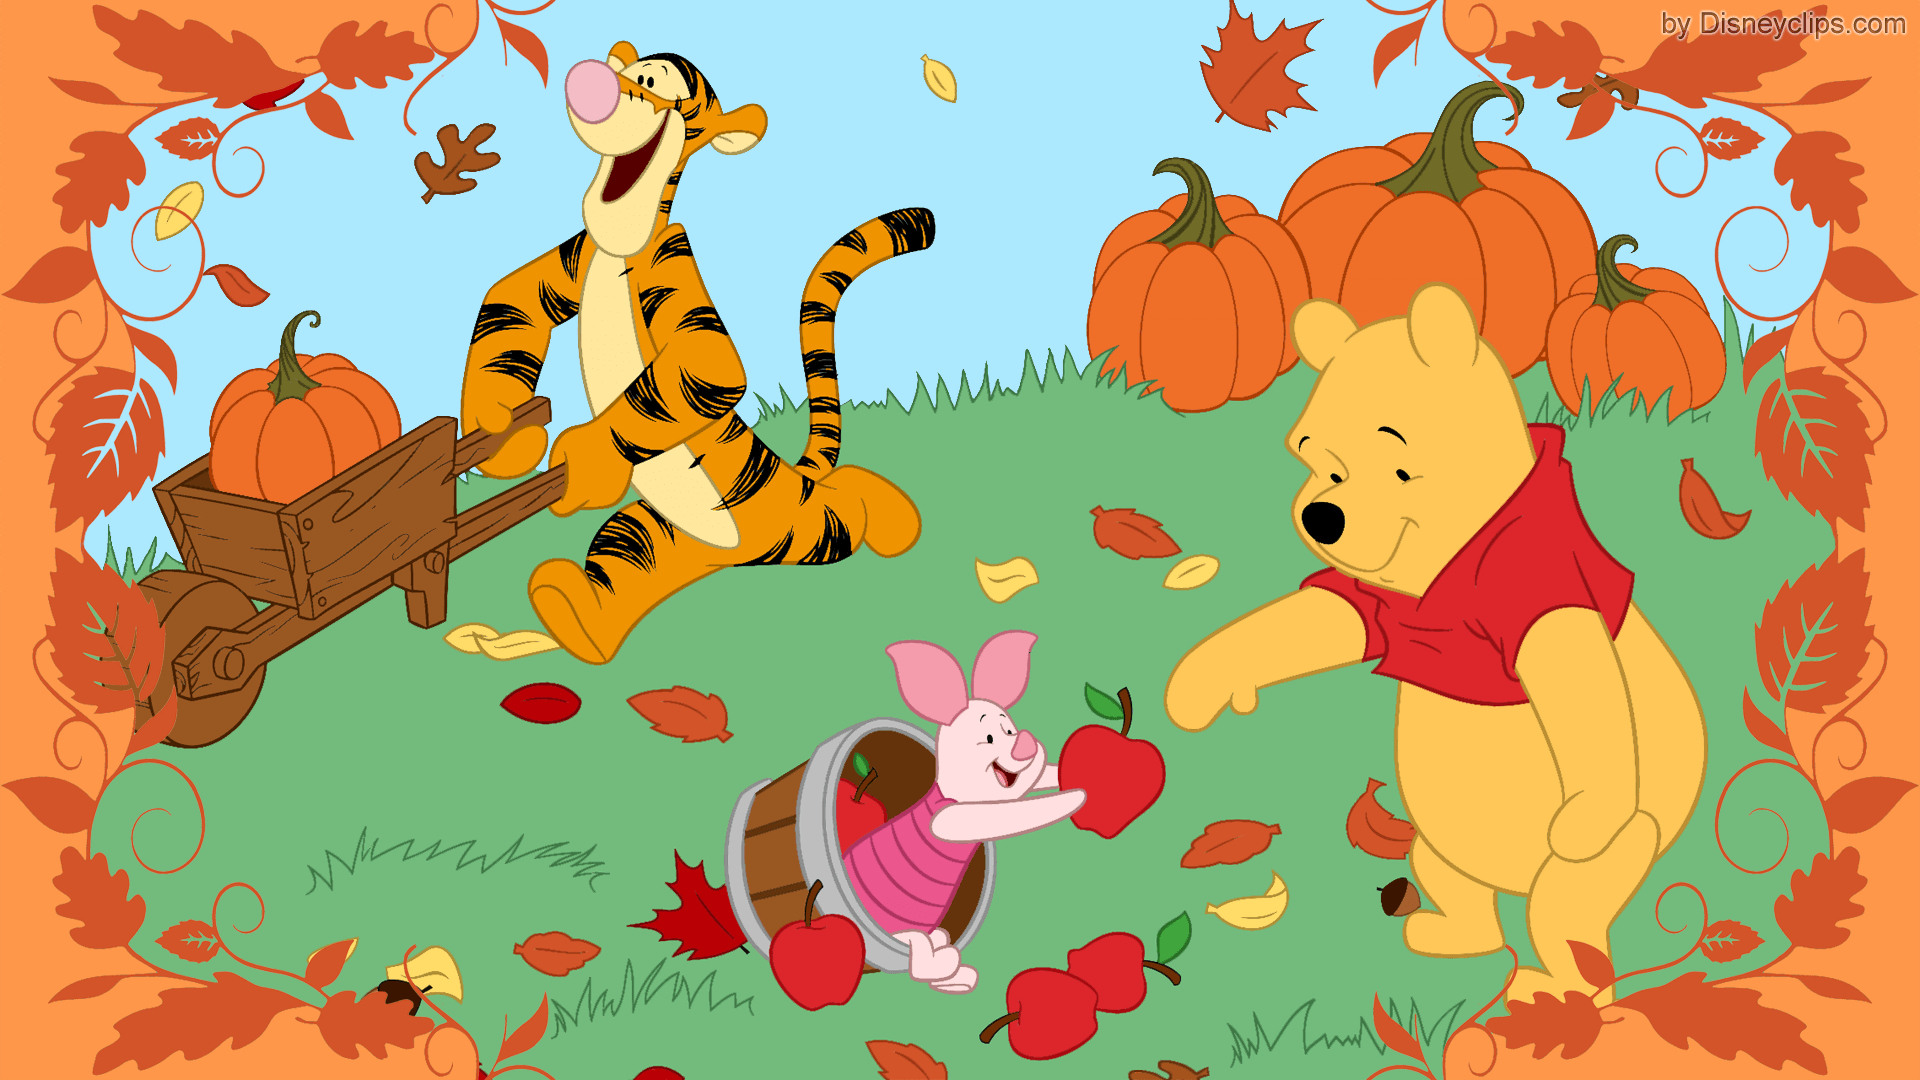 1920x1080 Winnie the Pooh and Friends Wallpaper